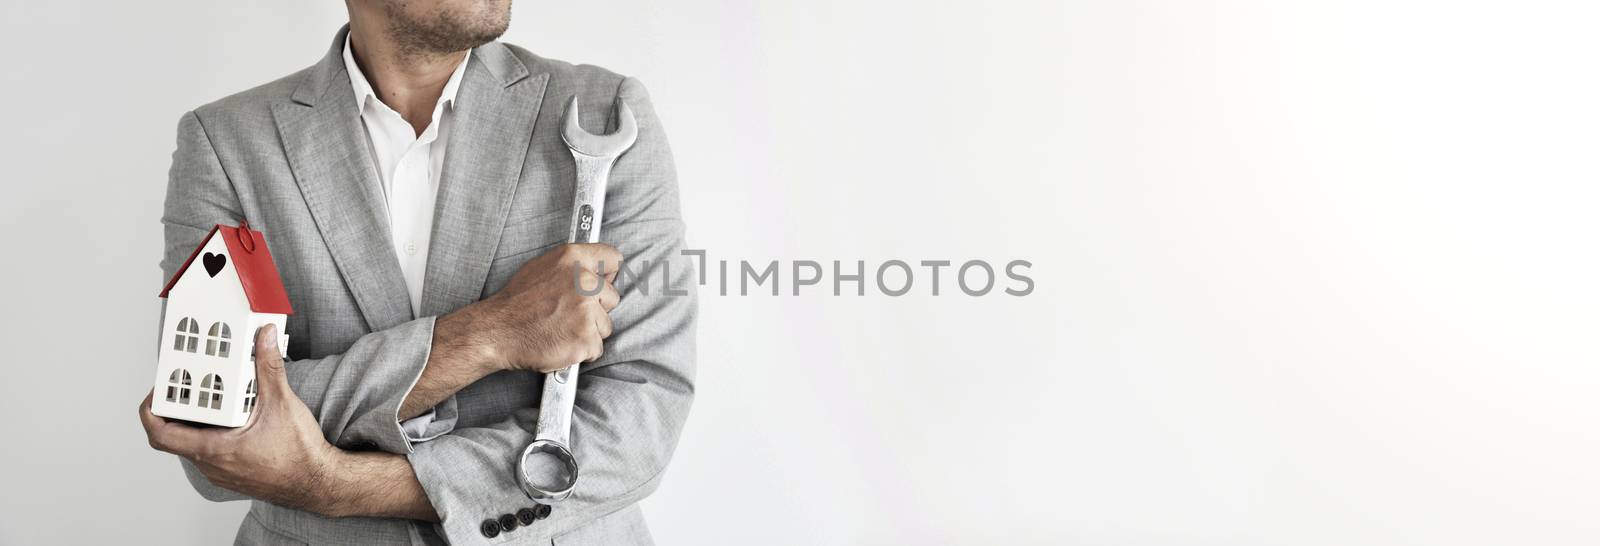 Home Builder. Engineering and Architect. Man on grey suit. Man holding wrench on grey background with copy space. Strong, Professional man, Civil construction worker, Designer.